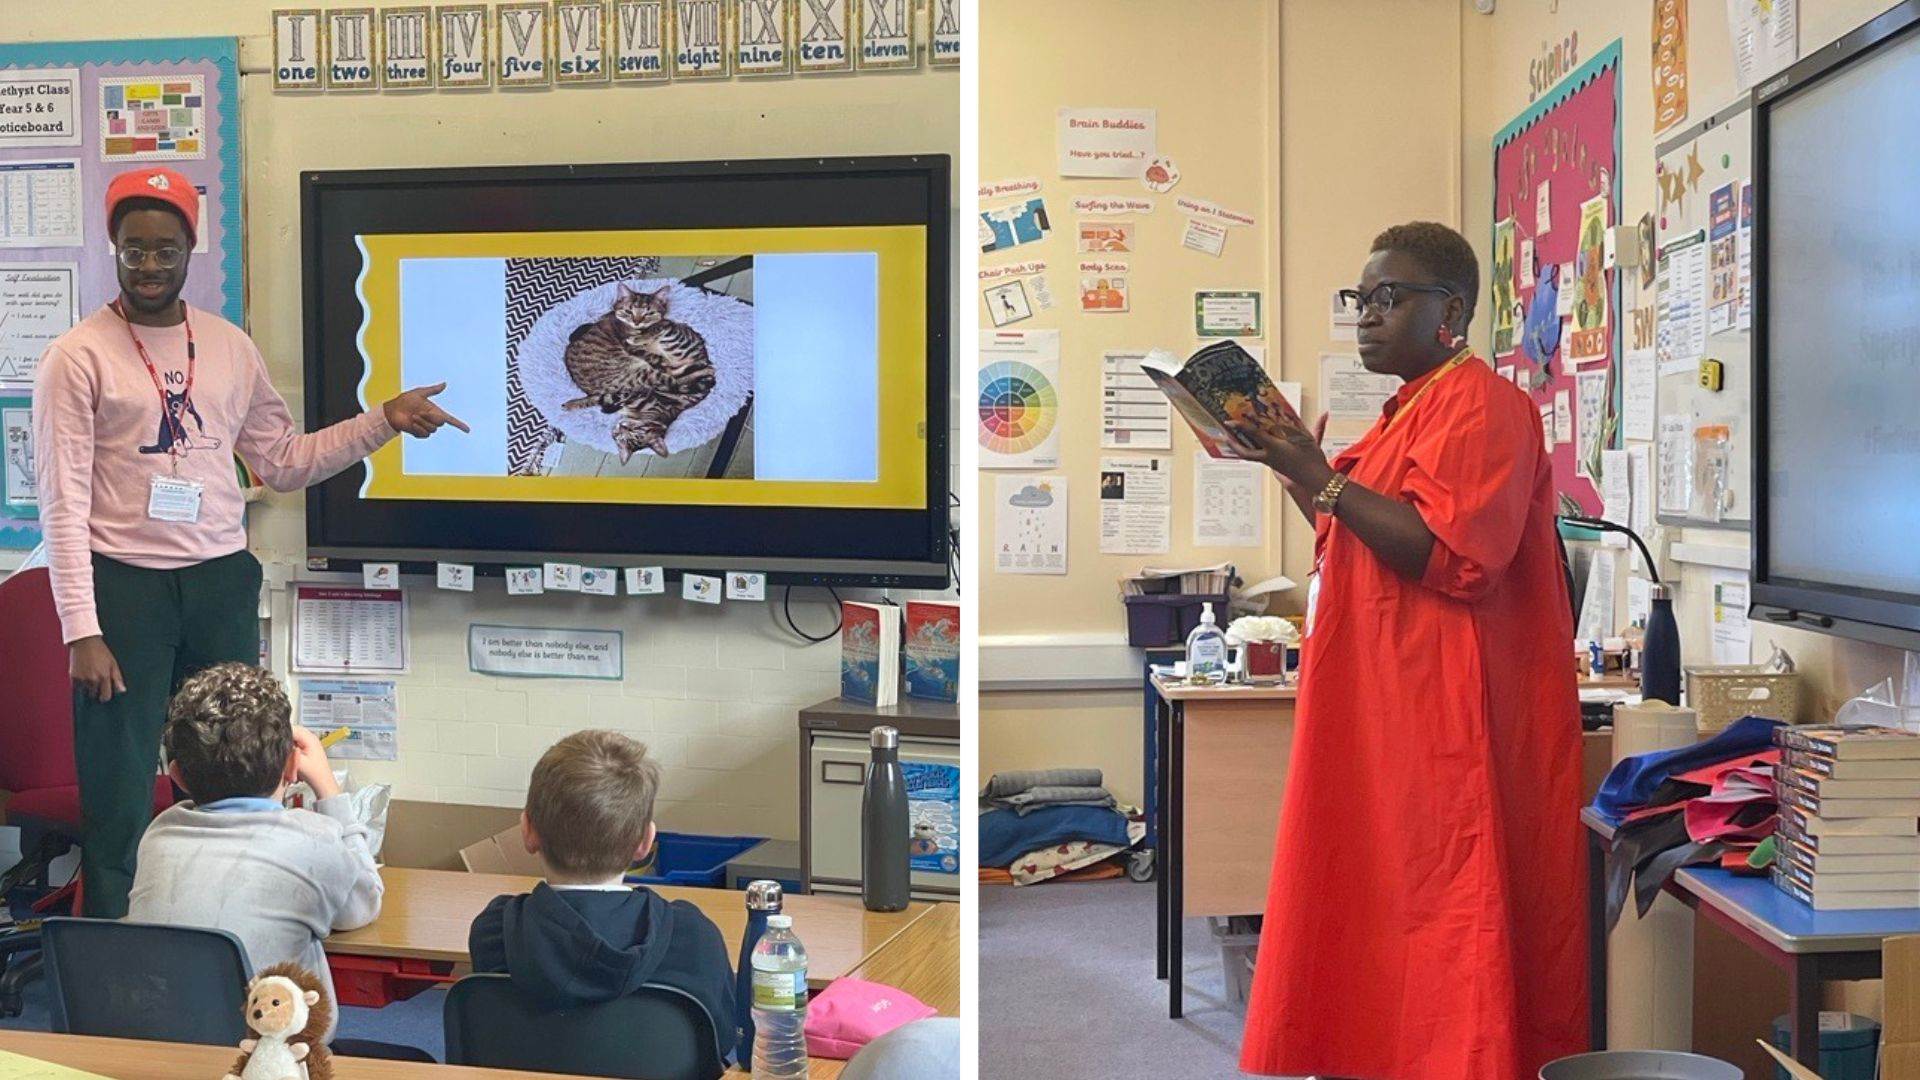 Both Alex Falase-Koya (L) and Tola Okogwu (R) attended a BookTrust Represents training workshop last year and are now giving fantastic school visits across the country